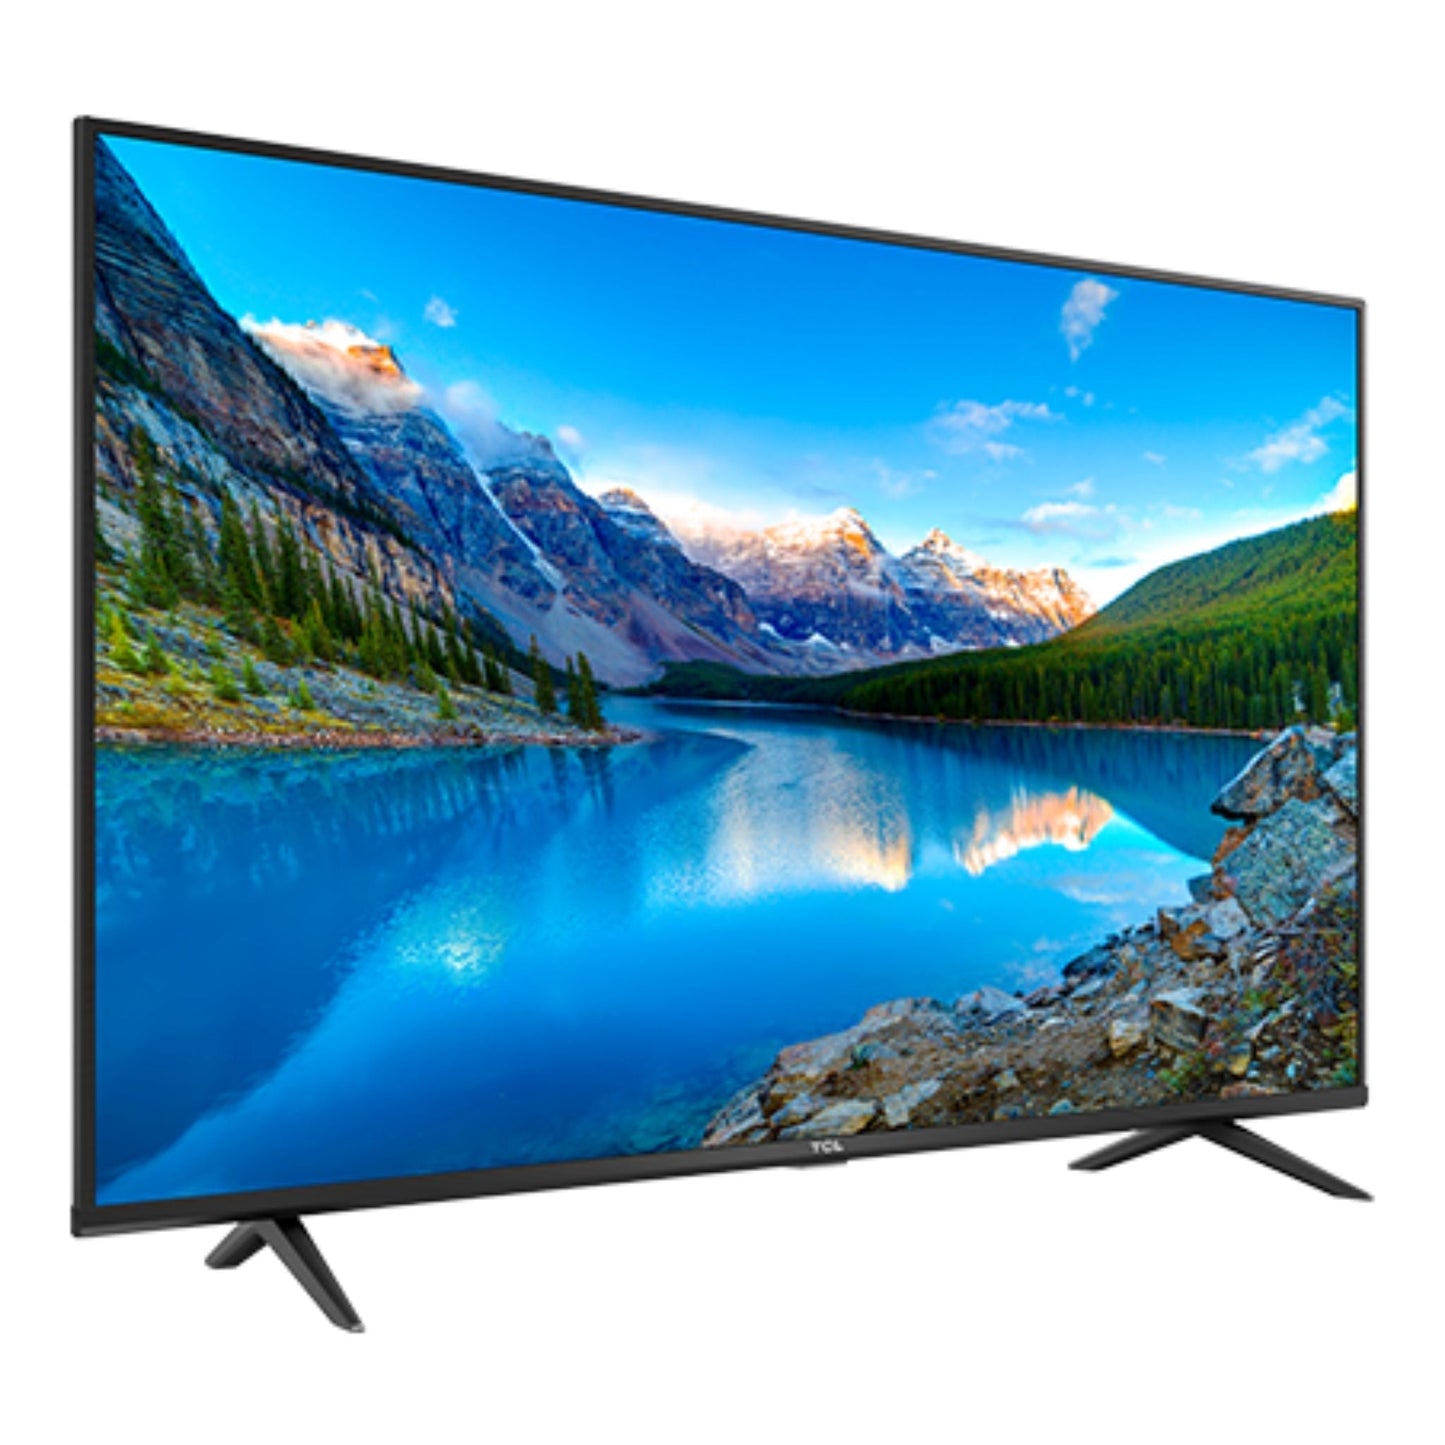 TCL 58 inch Smart TV, 58P635